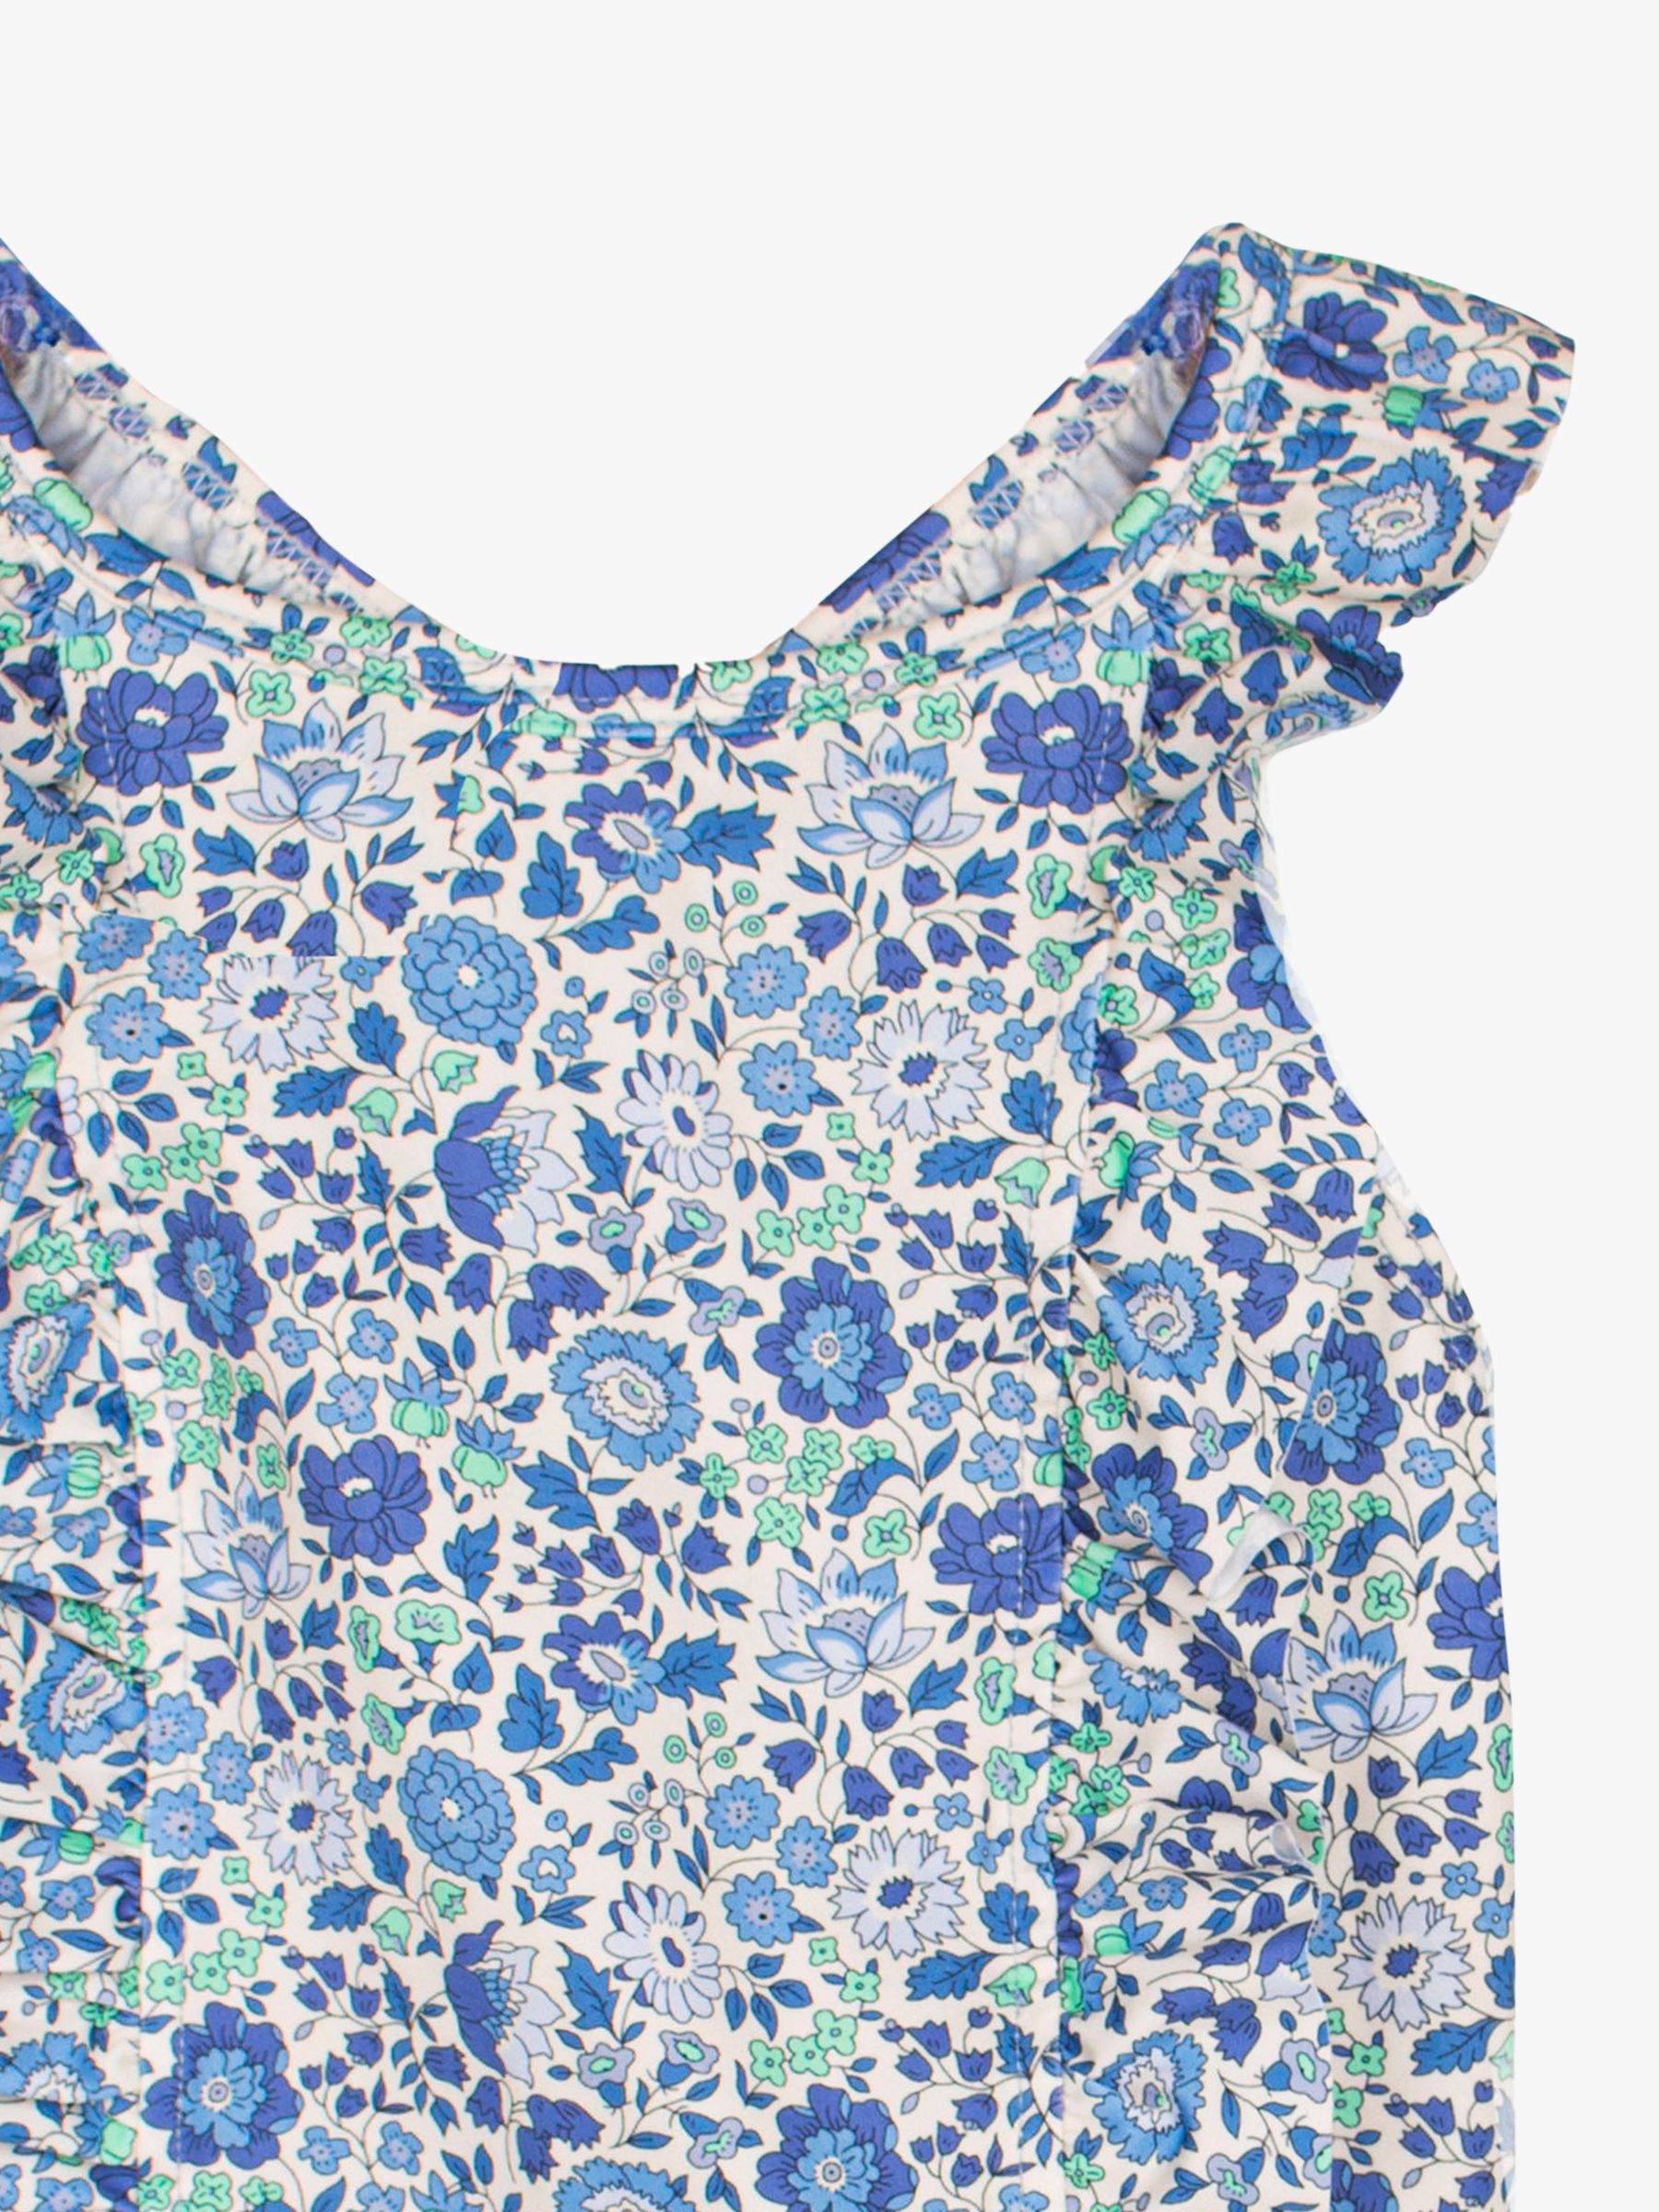 Buy Trotters Kids' Liberty D'Anjo Floral Print Frill Swimsuit, Blue Online at johnlewis.com